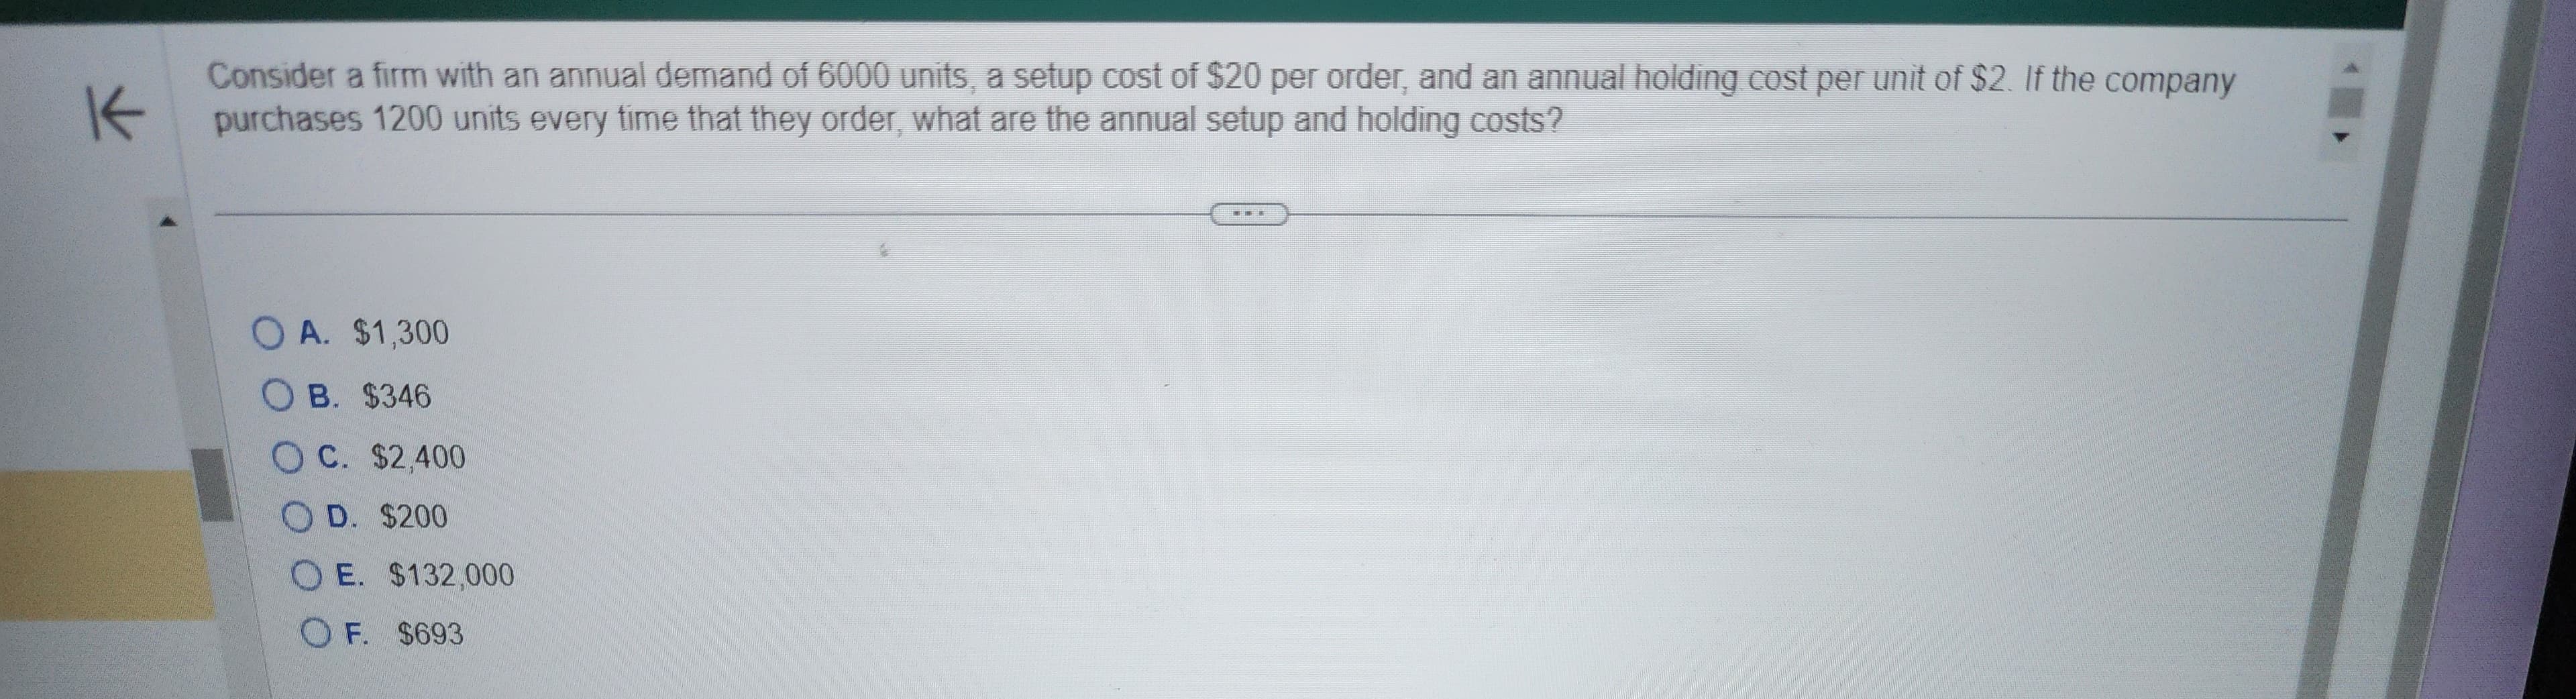 K
Consider a firm with an annual demand of 6000 units, a setup cost of $20 per order, and an annual holding cost per unit of $2. If the company
purchases 1200 units every time that they order, what are the annual setup and holding costs?
A. $1,300
B. $346
O C. $2,400
OD. $200
OE. $132,000
OF. $693
TER